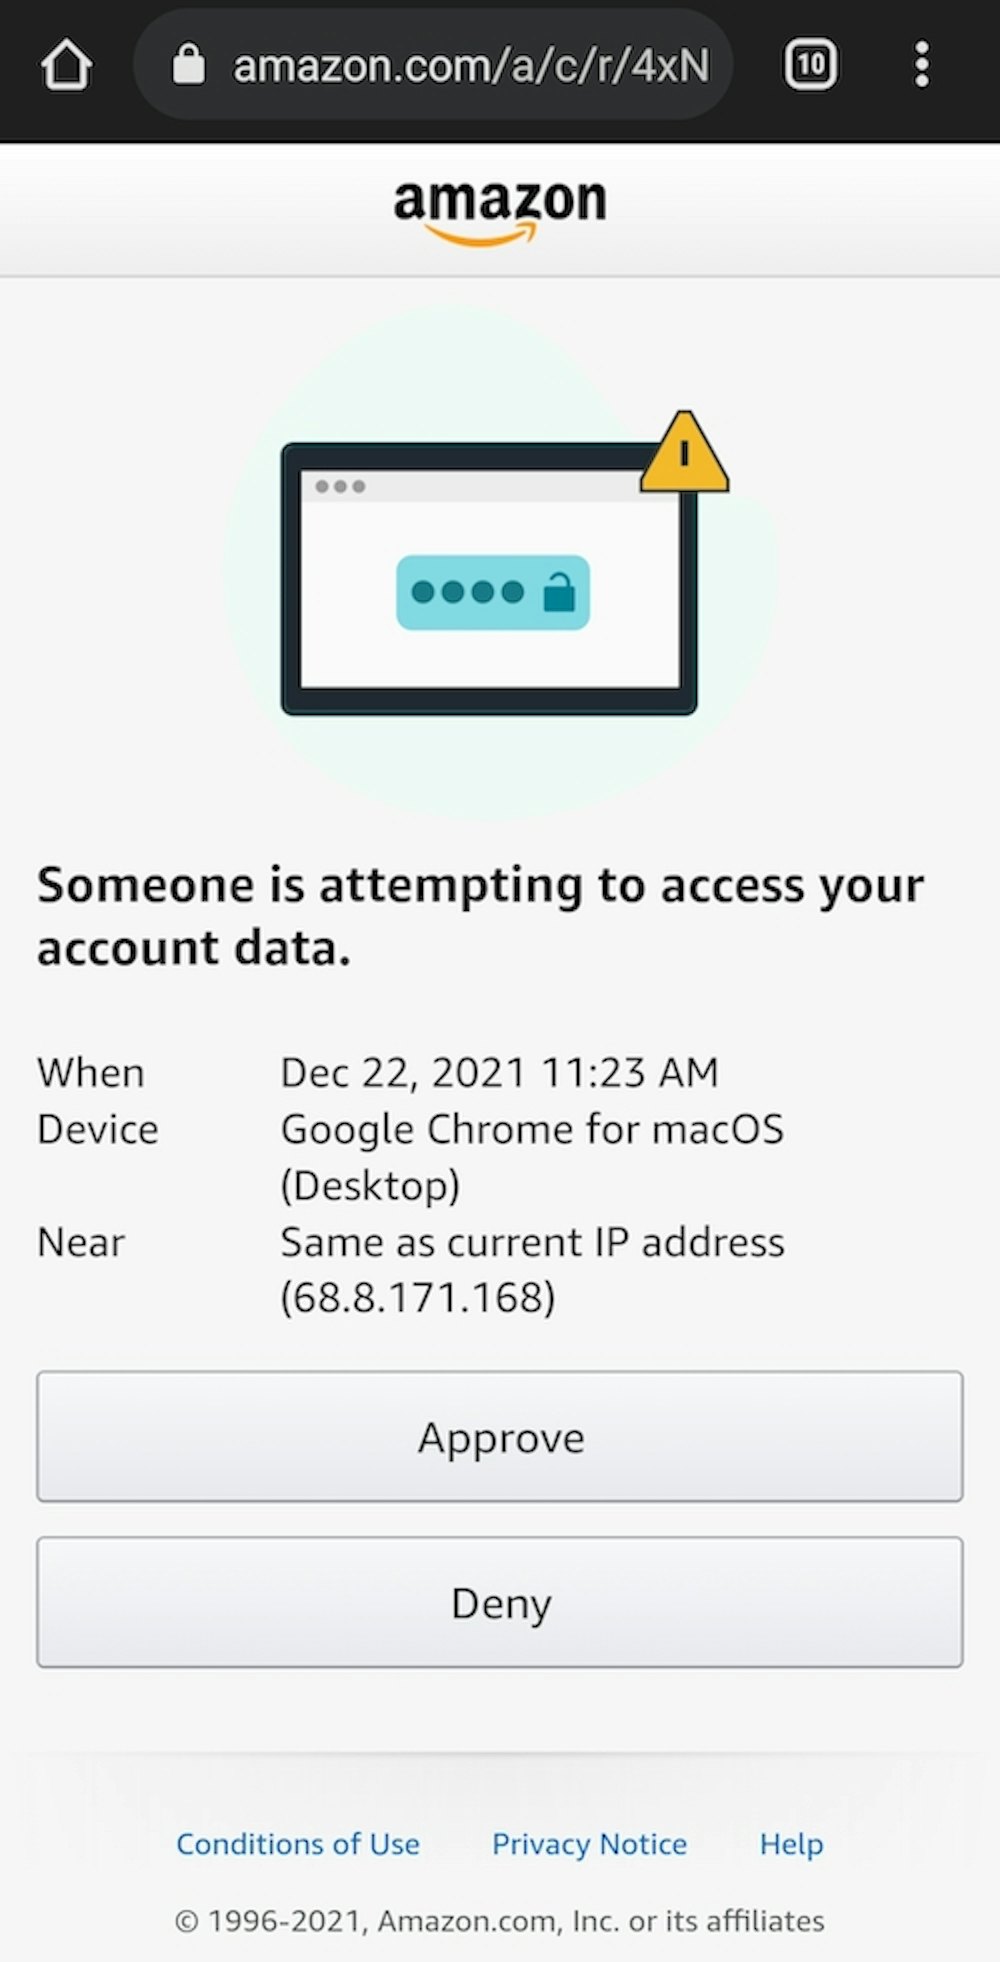 Approval screen for Amazon account access.